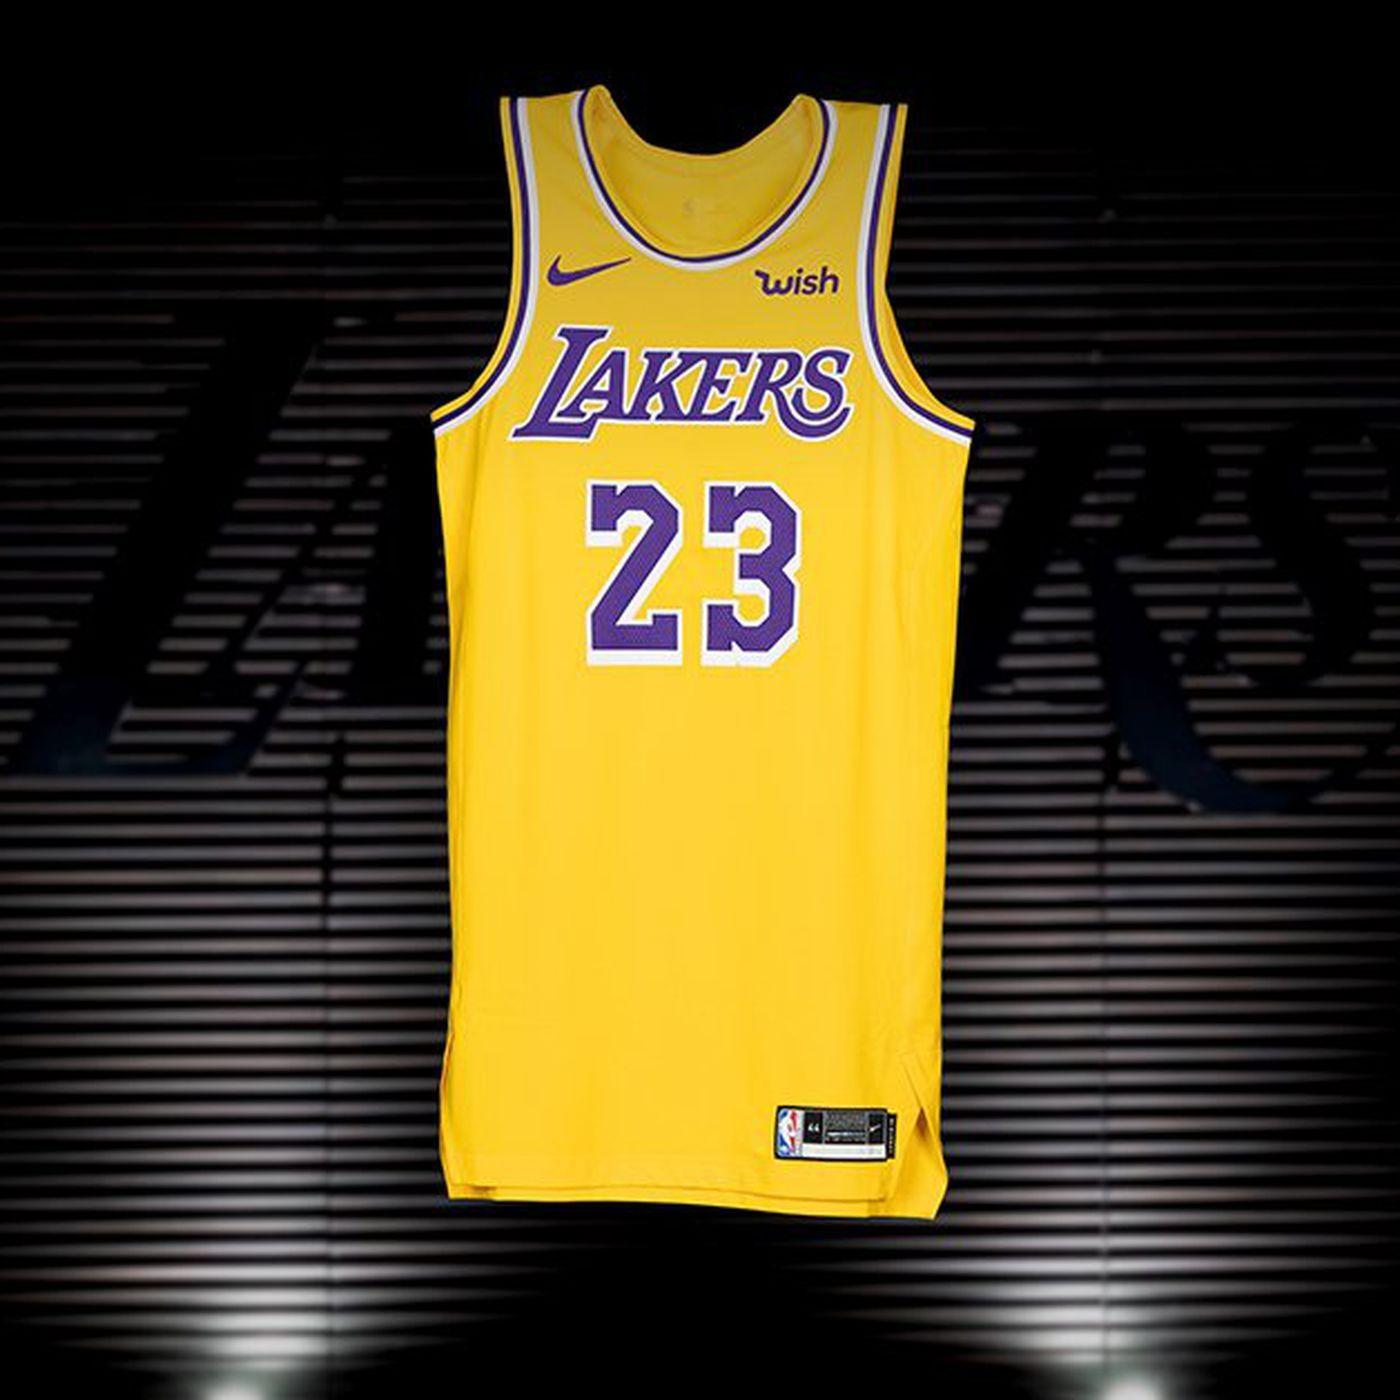 Wish On Lakers Jersey Logo - The Lakers are going back to their Showtime jerseys and they're so ...